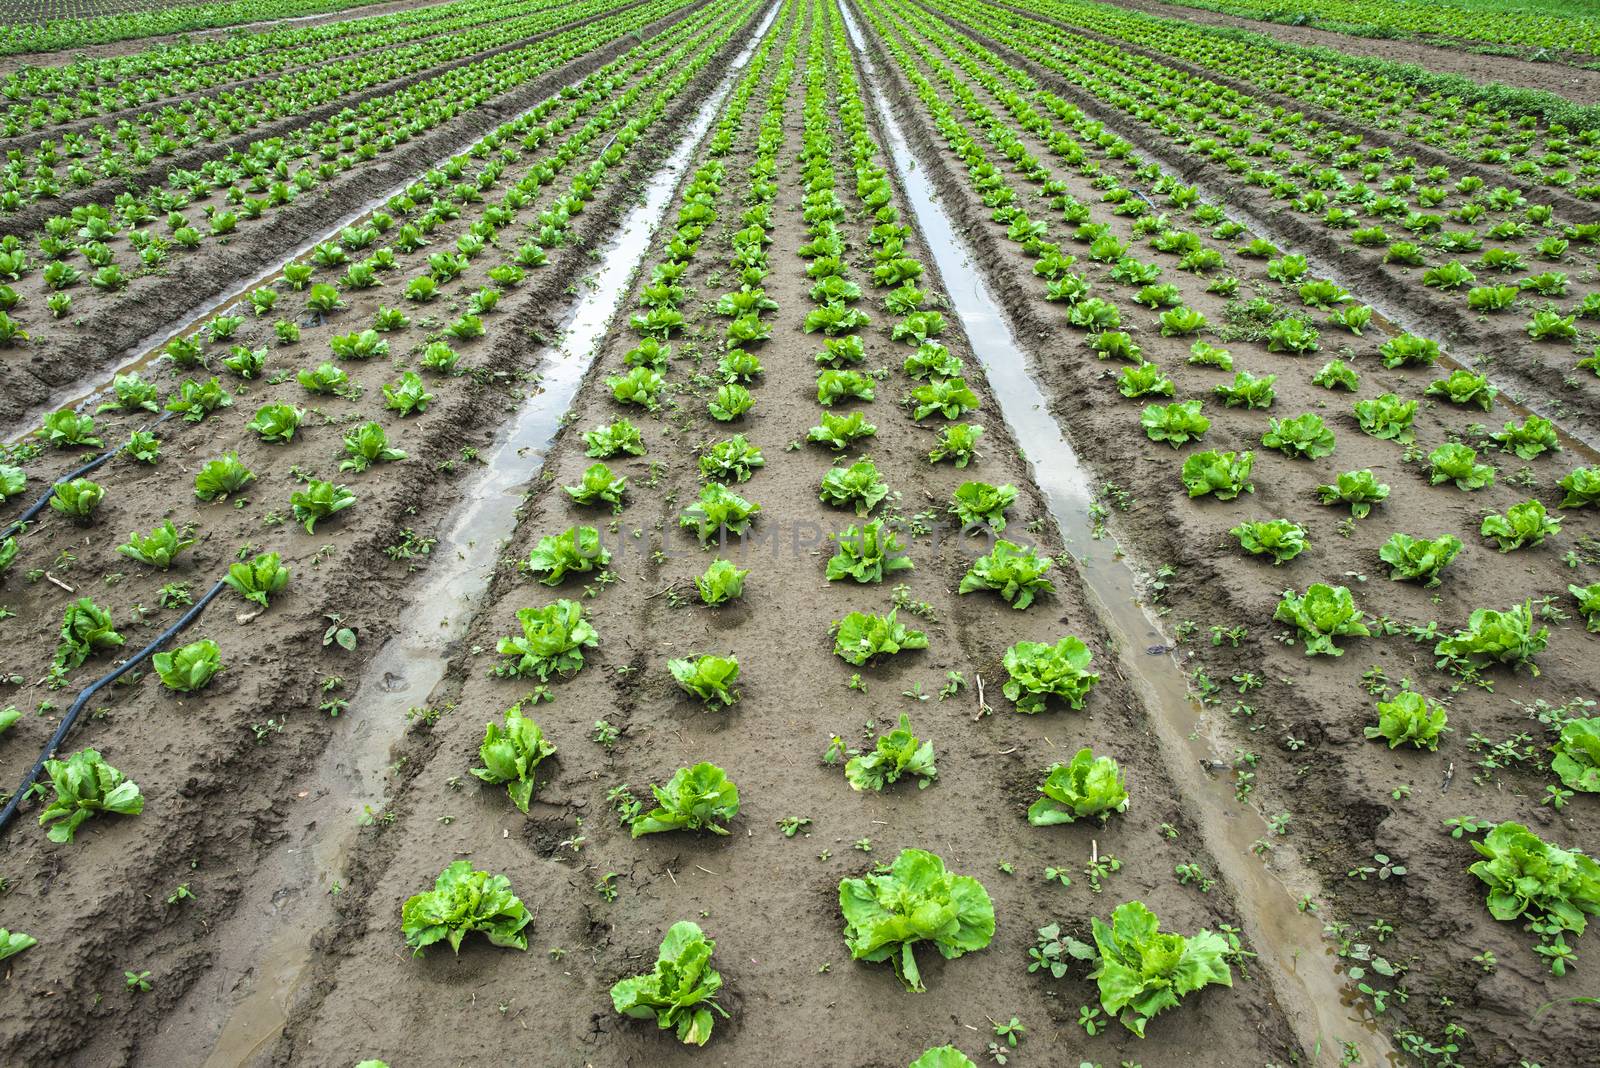 Iceberg lettuce plantation. Irrigation canals with water. Plants in rows.